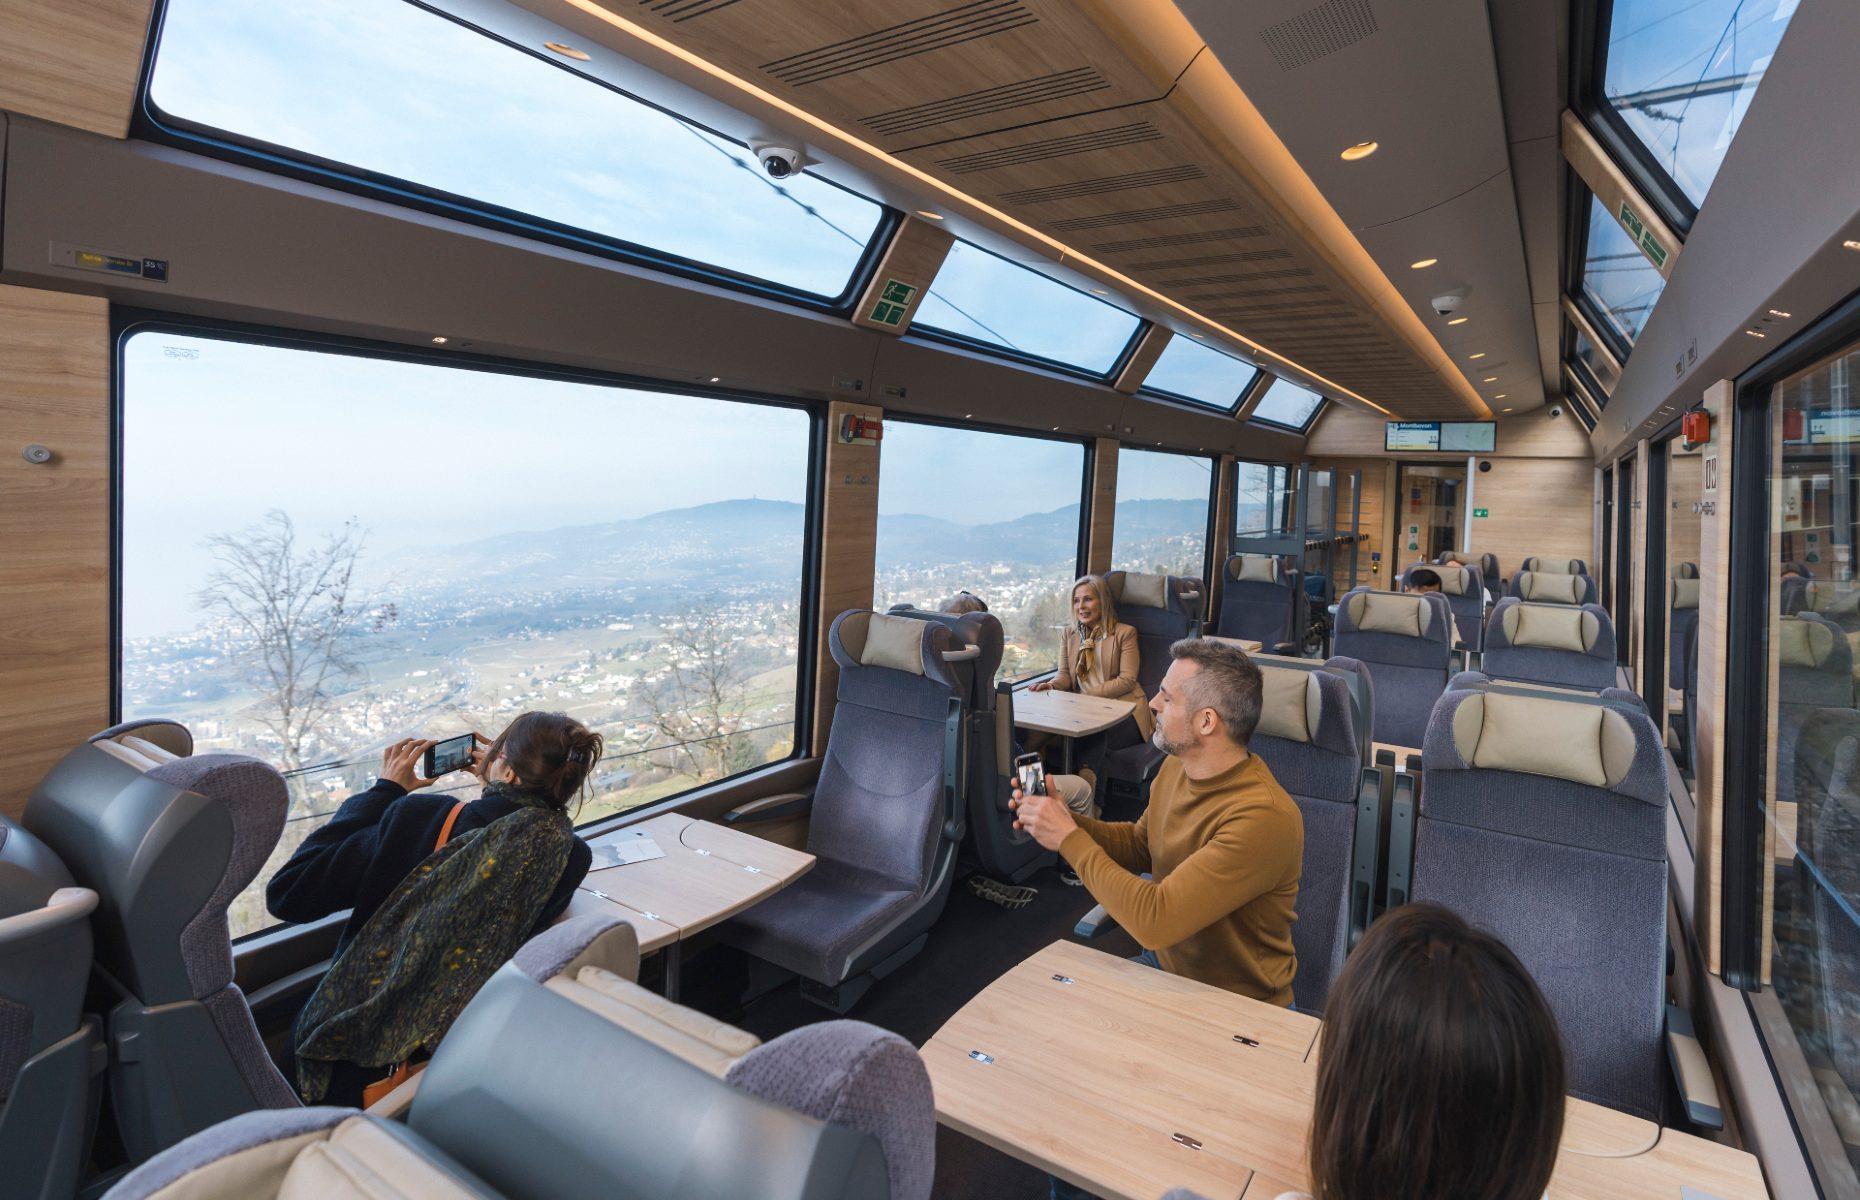 <p>Three years later than planned – and over a century since the project was first proposed – Switzerland’s <a href="https://www.gpx.swiss/en/">GoldenPass Express</a> (GPX) finally launched on 11 December 2022 and recently expanded its timetable to four daily round-trips. The long-awaited route connects three key Swiss tourist destinations – Montreux, Gstaad and Interlaken – with the complete journey taking just over three hours. While the huge panoramic windows available across all three passenger classes are quite something to behold, they aren’t the only remarkable feature of the GPX…</p>